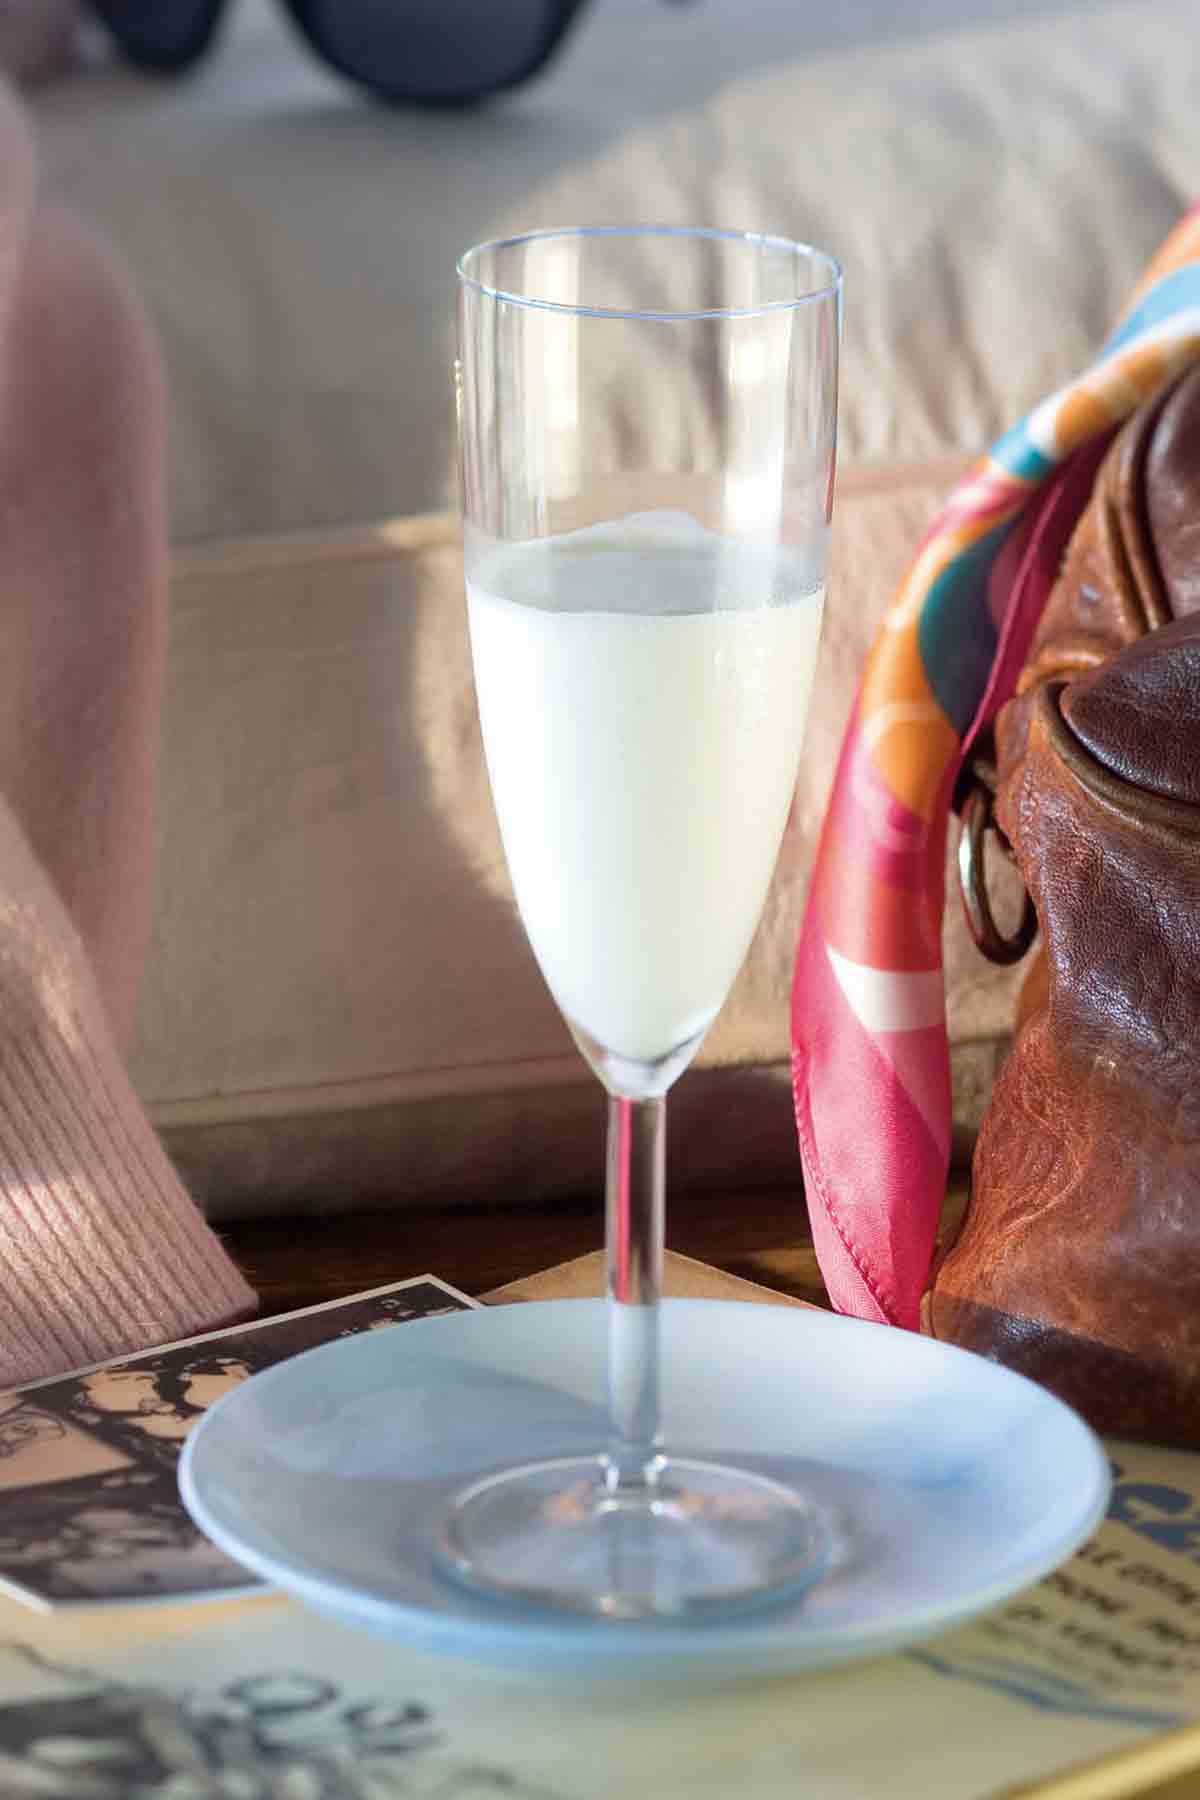 A champagne glass of Sgroppino, also called Lemon Chill, on a blue plate.